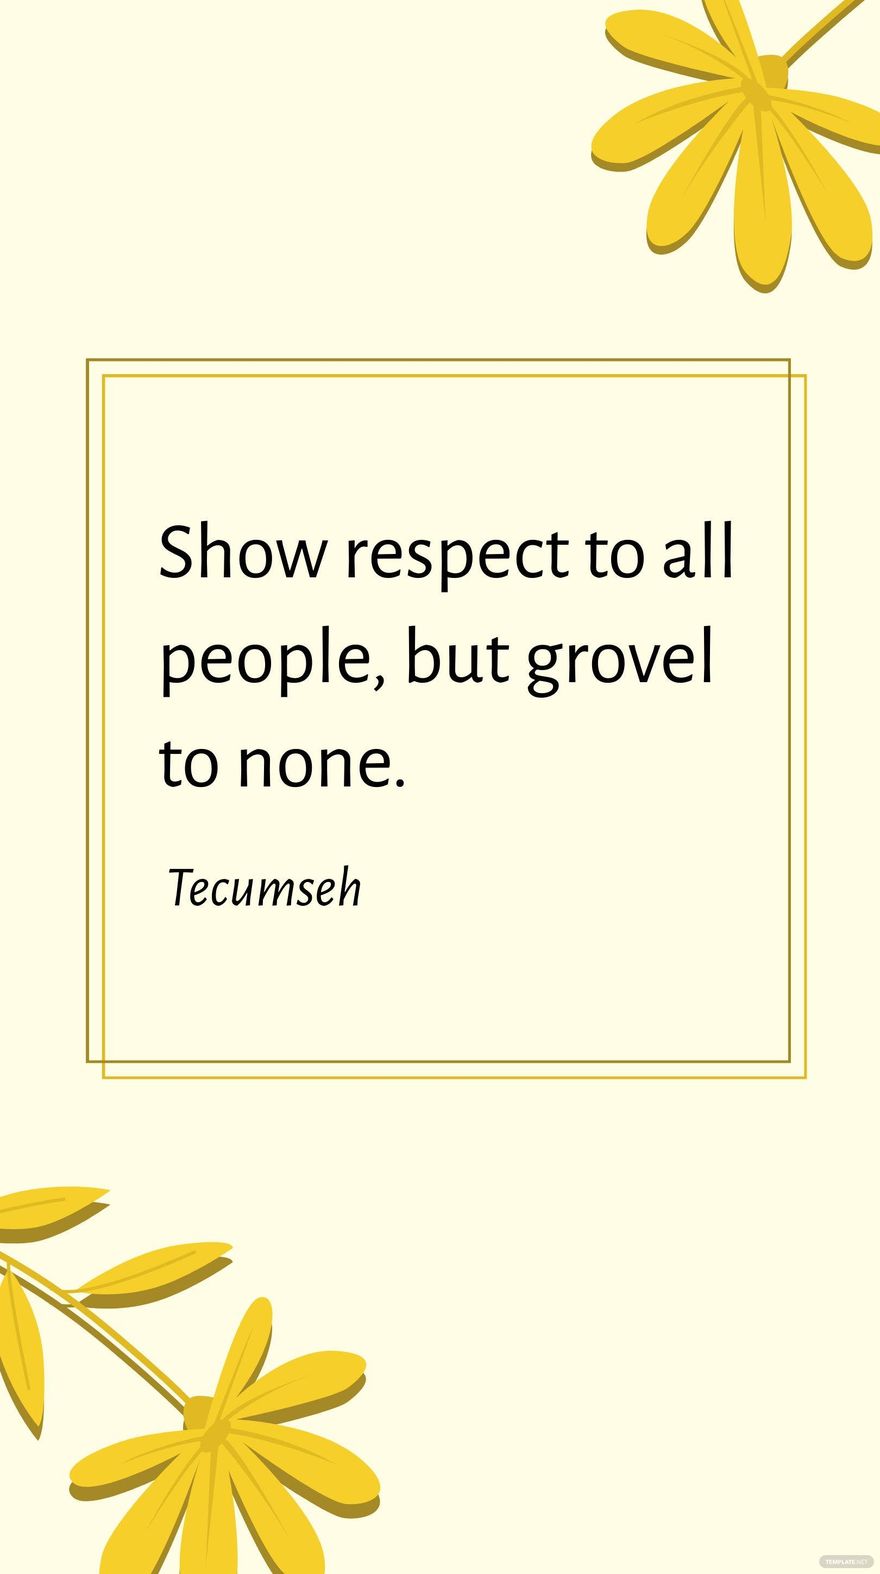 Tecumseh - Show respect to all people, but grovel to none. in JPG